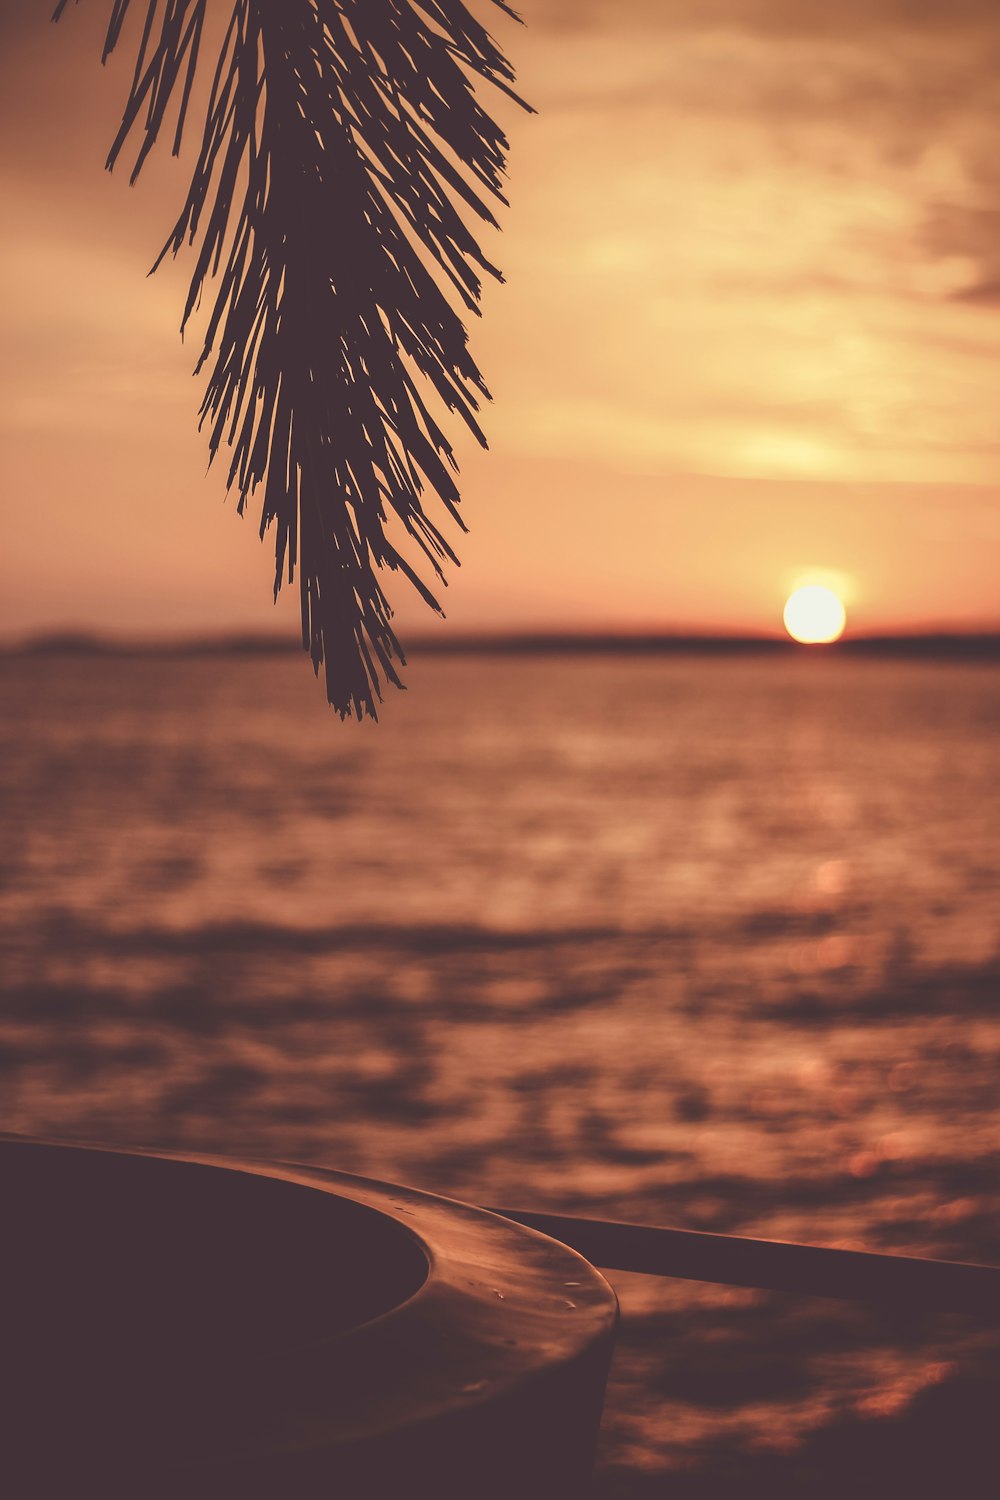 500 Stunning Tropical Sunset Pictures Hd Download Free Images